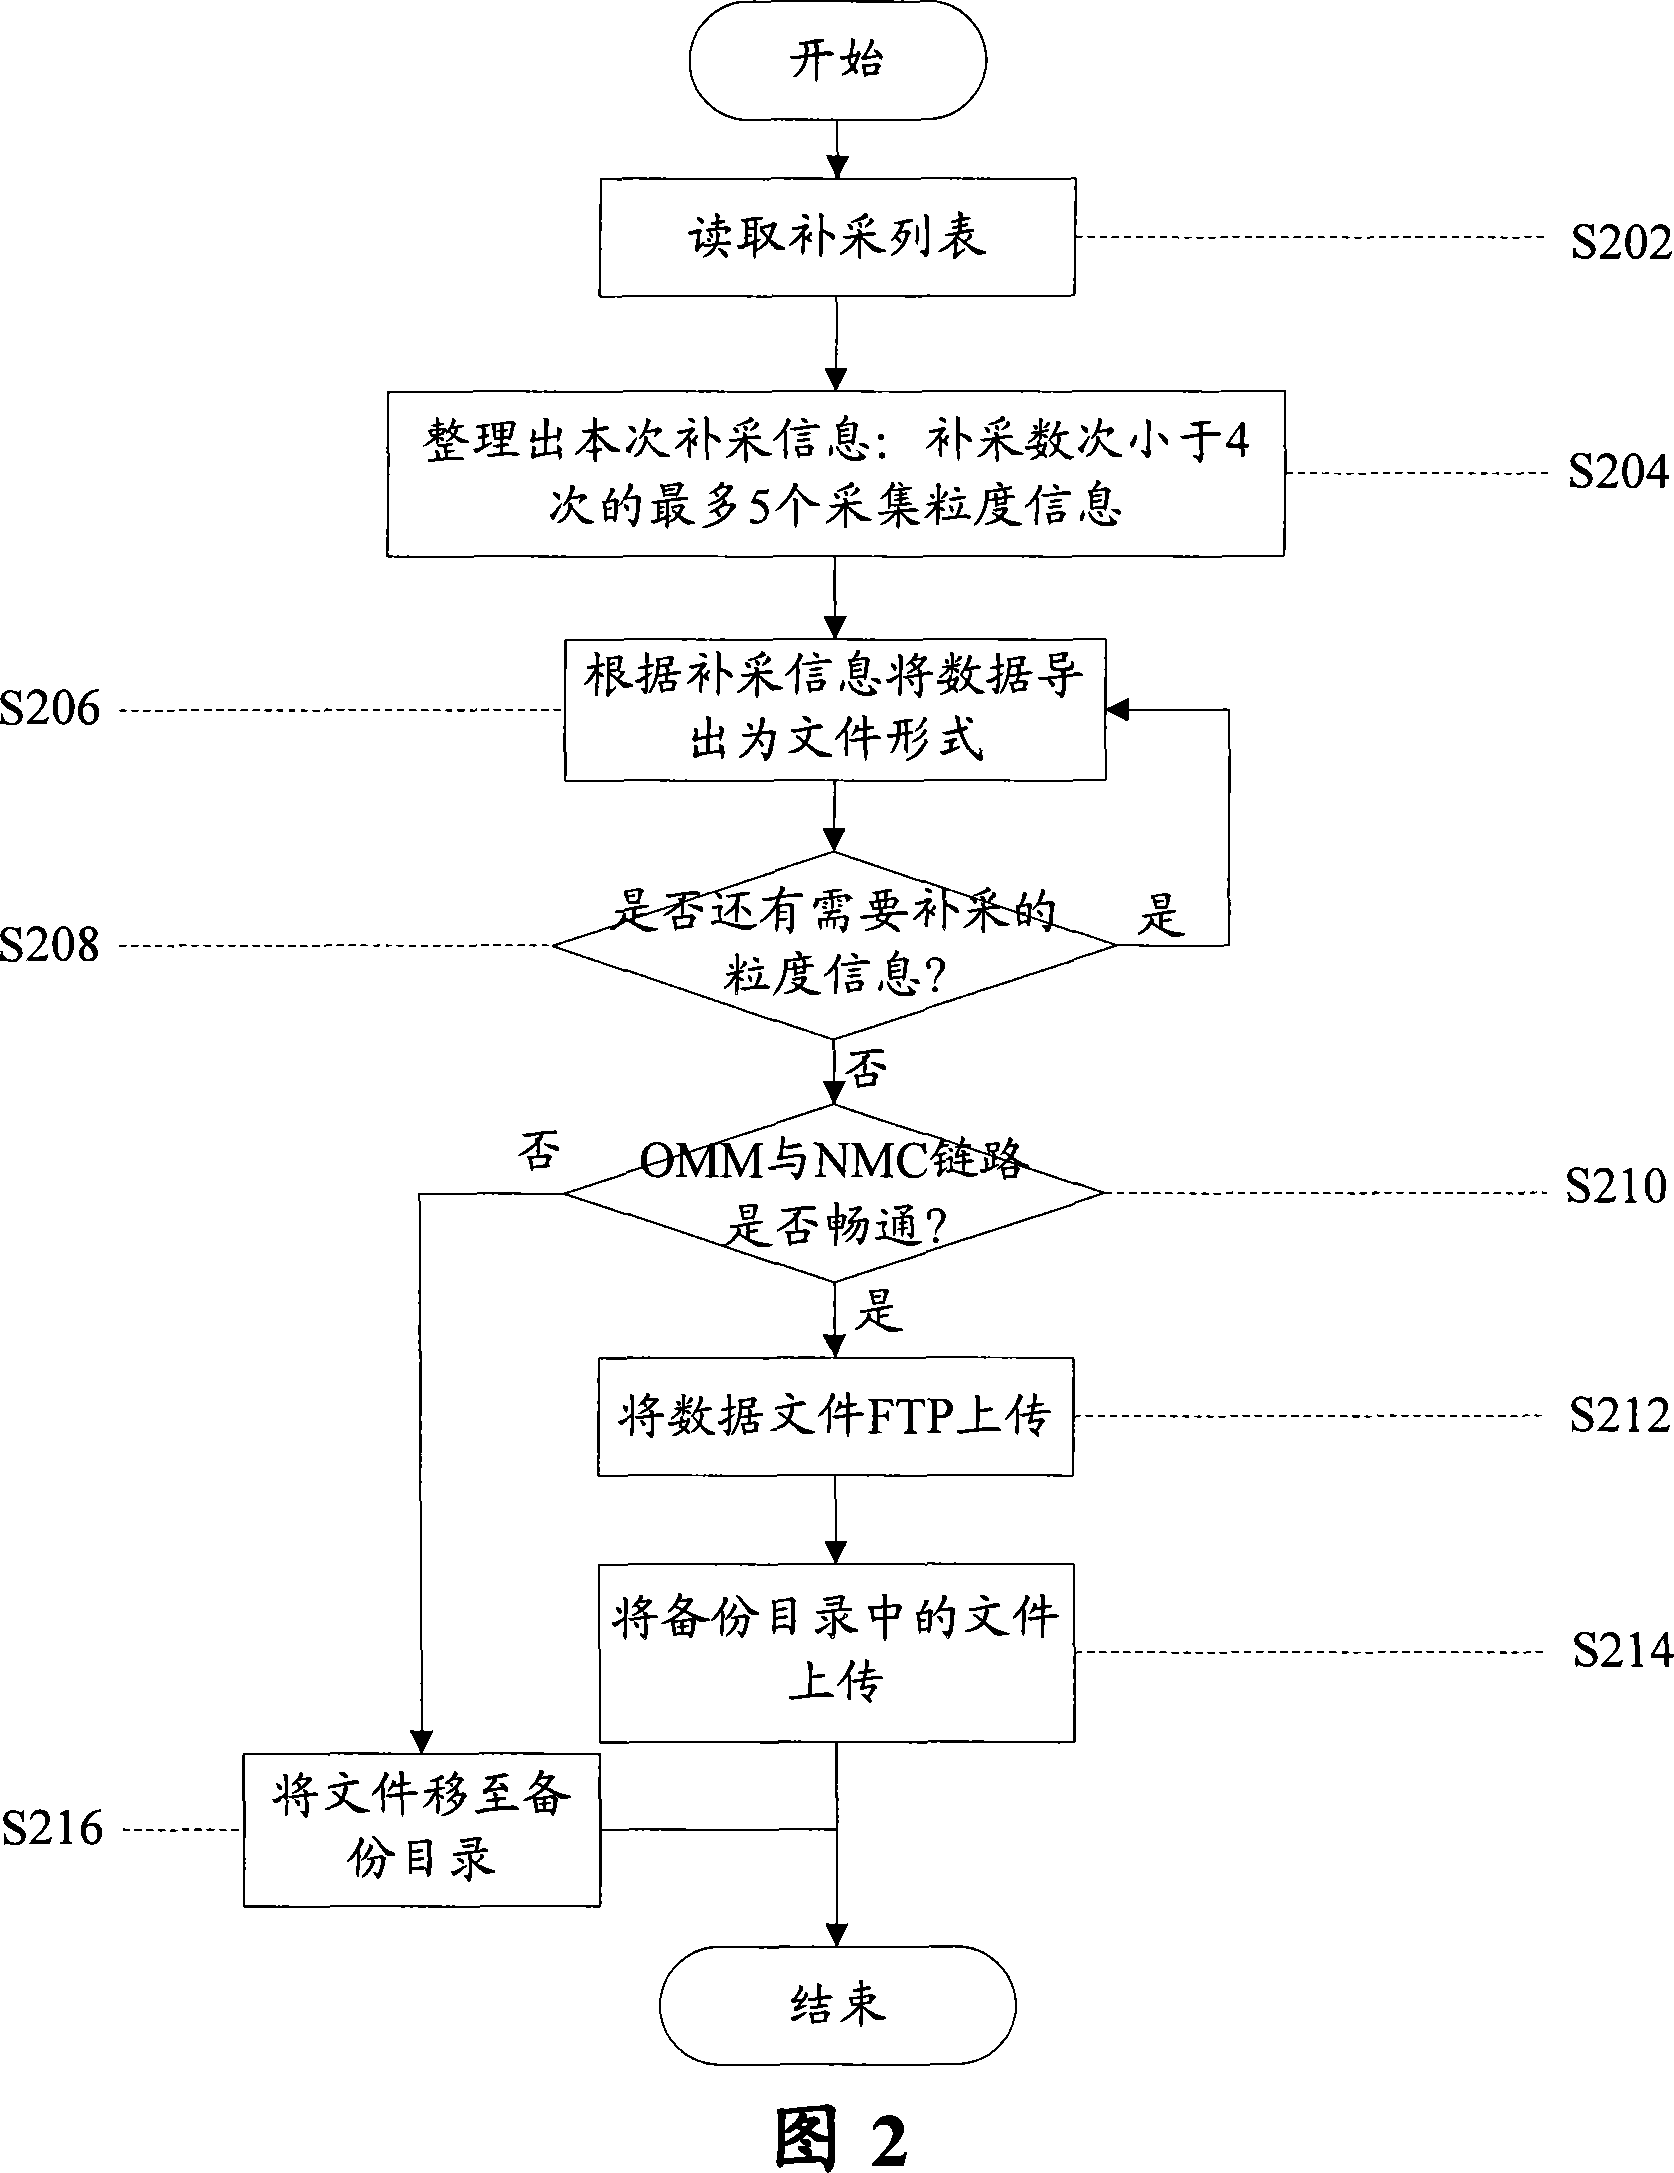 Method and system for supplementary reporting of performance data